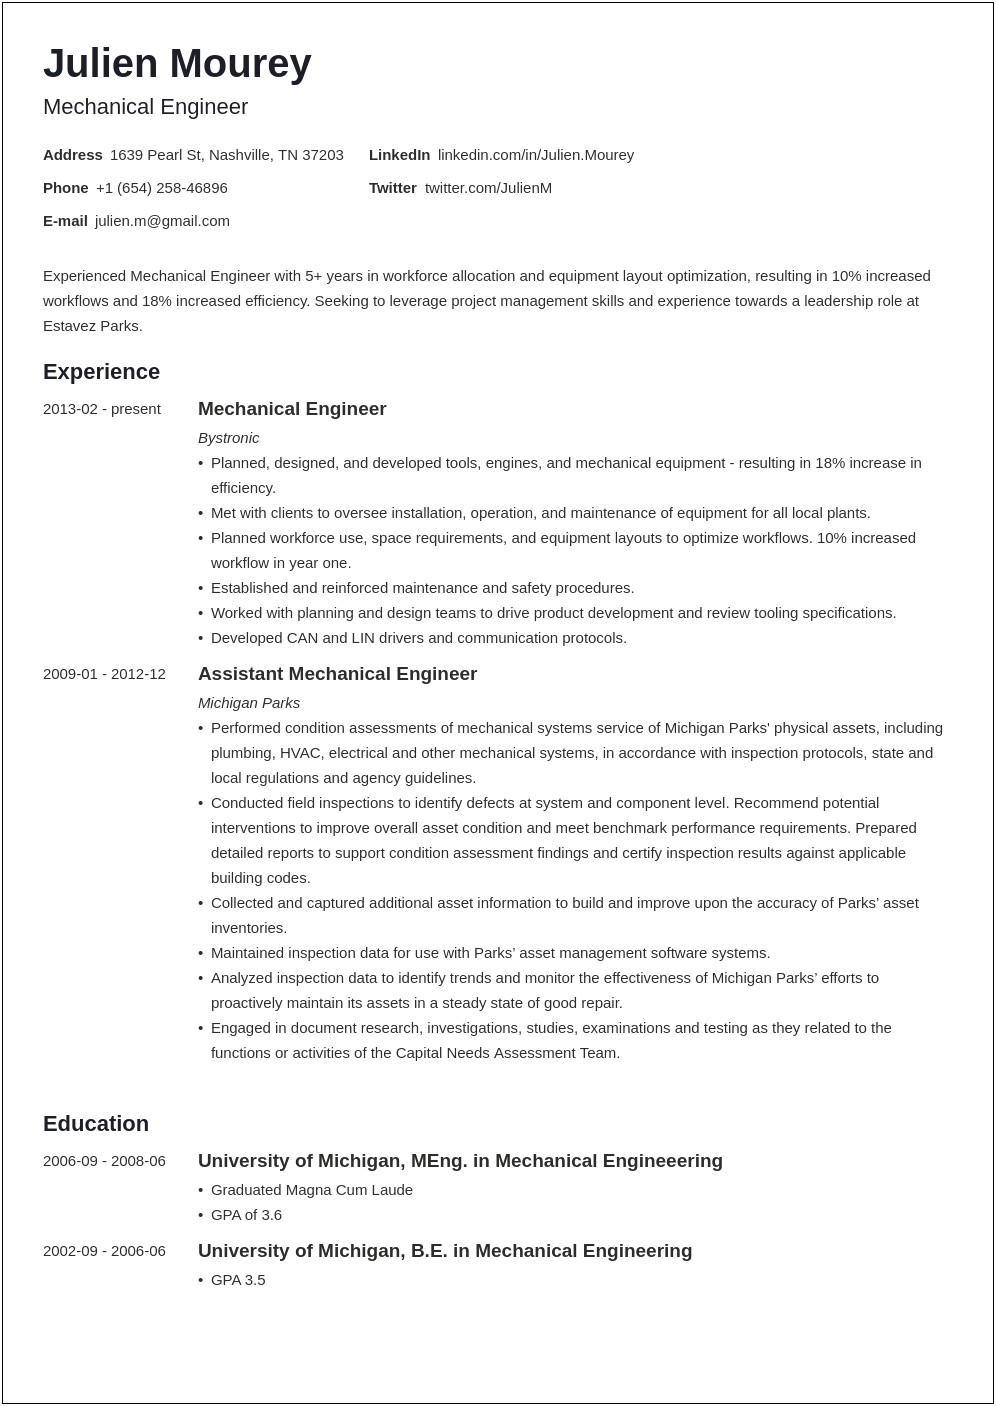 Resume Objective For Experienced Engineer